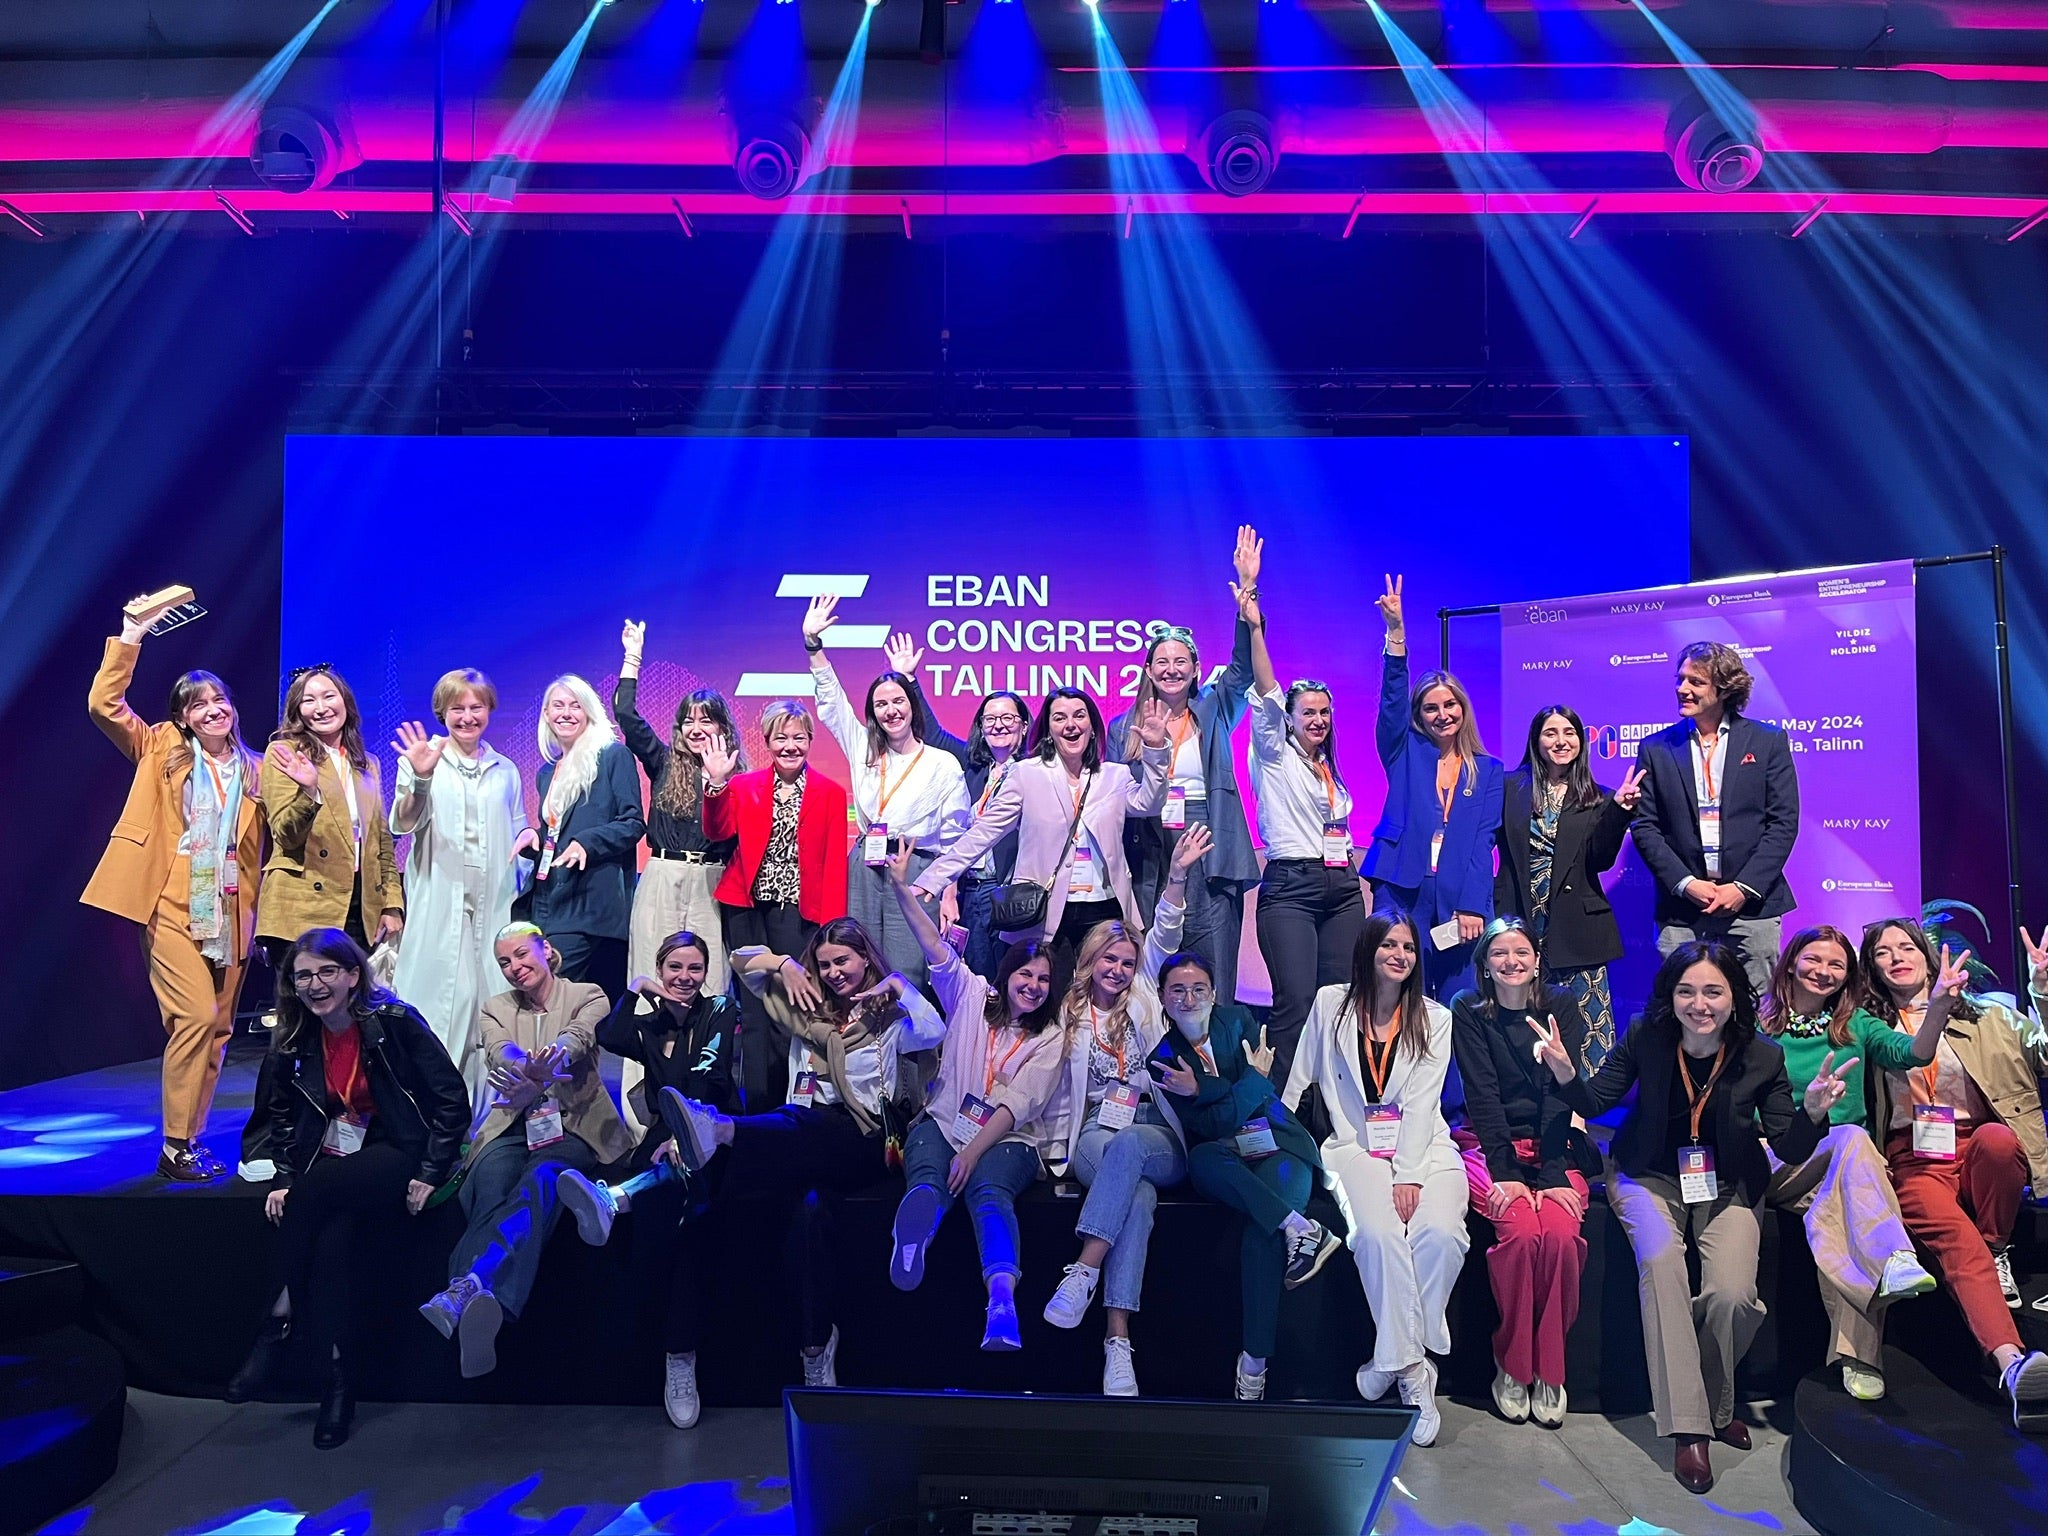 26 women entrepreneurs from 12 countries across Europe and Central Asia attended the EXPO Capital Quest pitching event in Tallinn, Estonia under the EBAN Congress 2024, organized by UN Women Regional Office for Europe and Central Asia in partnership with European Business Angels Network (EBAN).